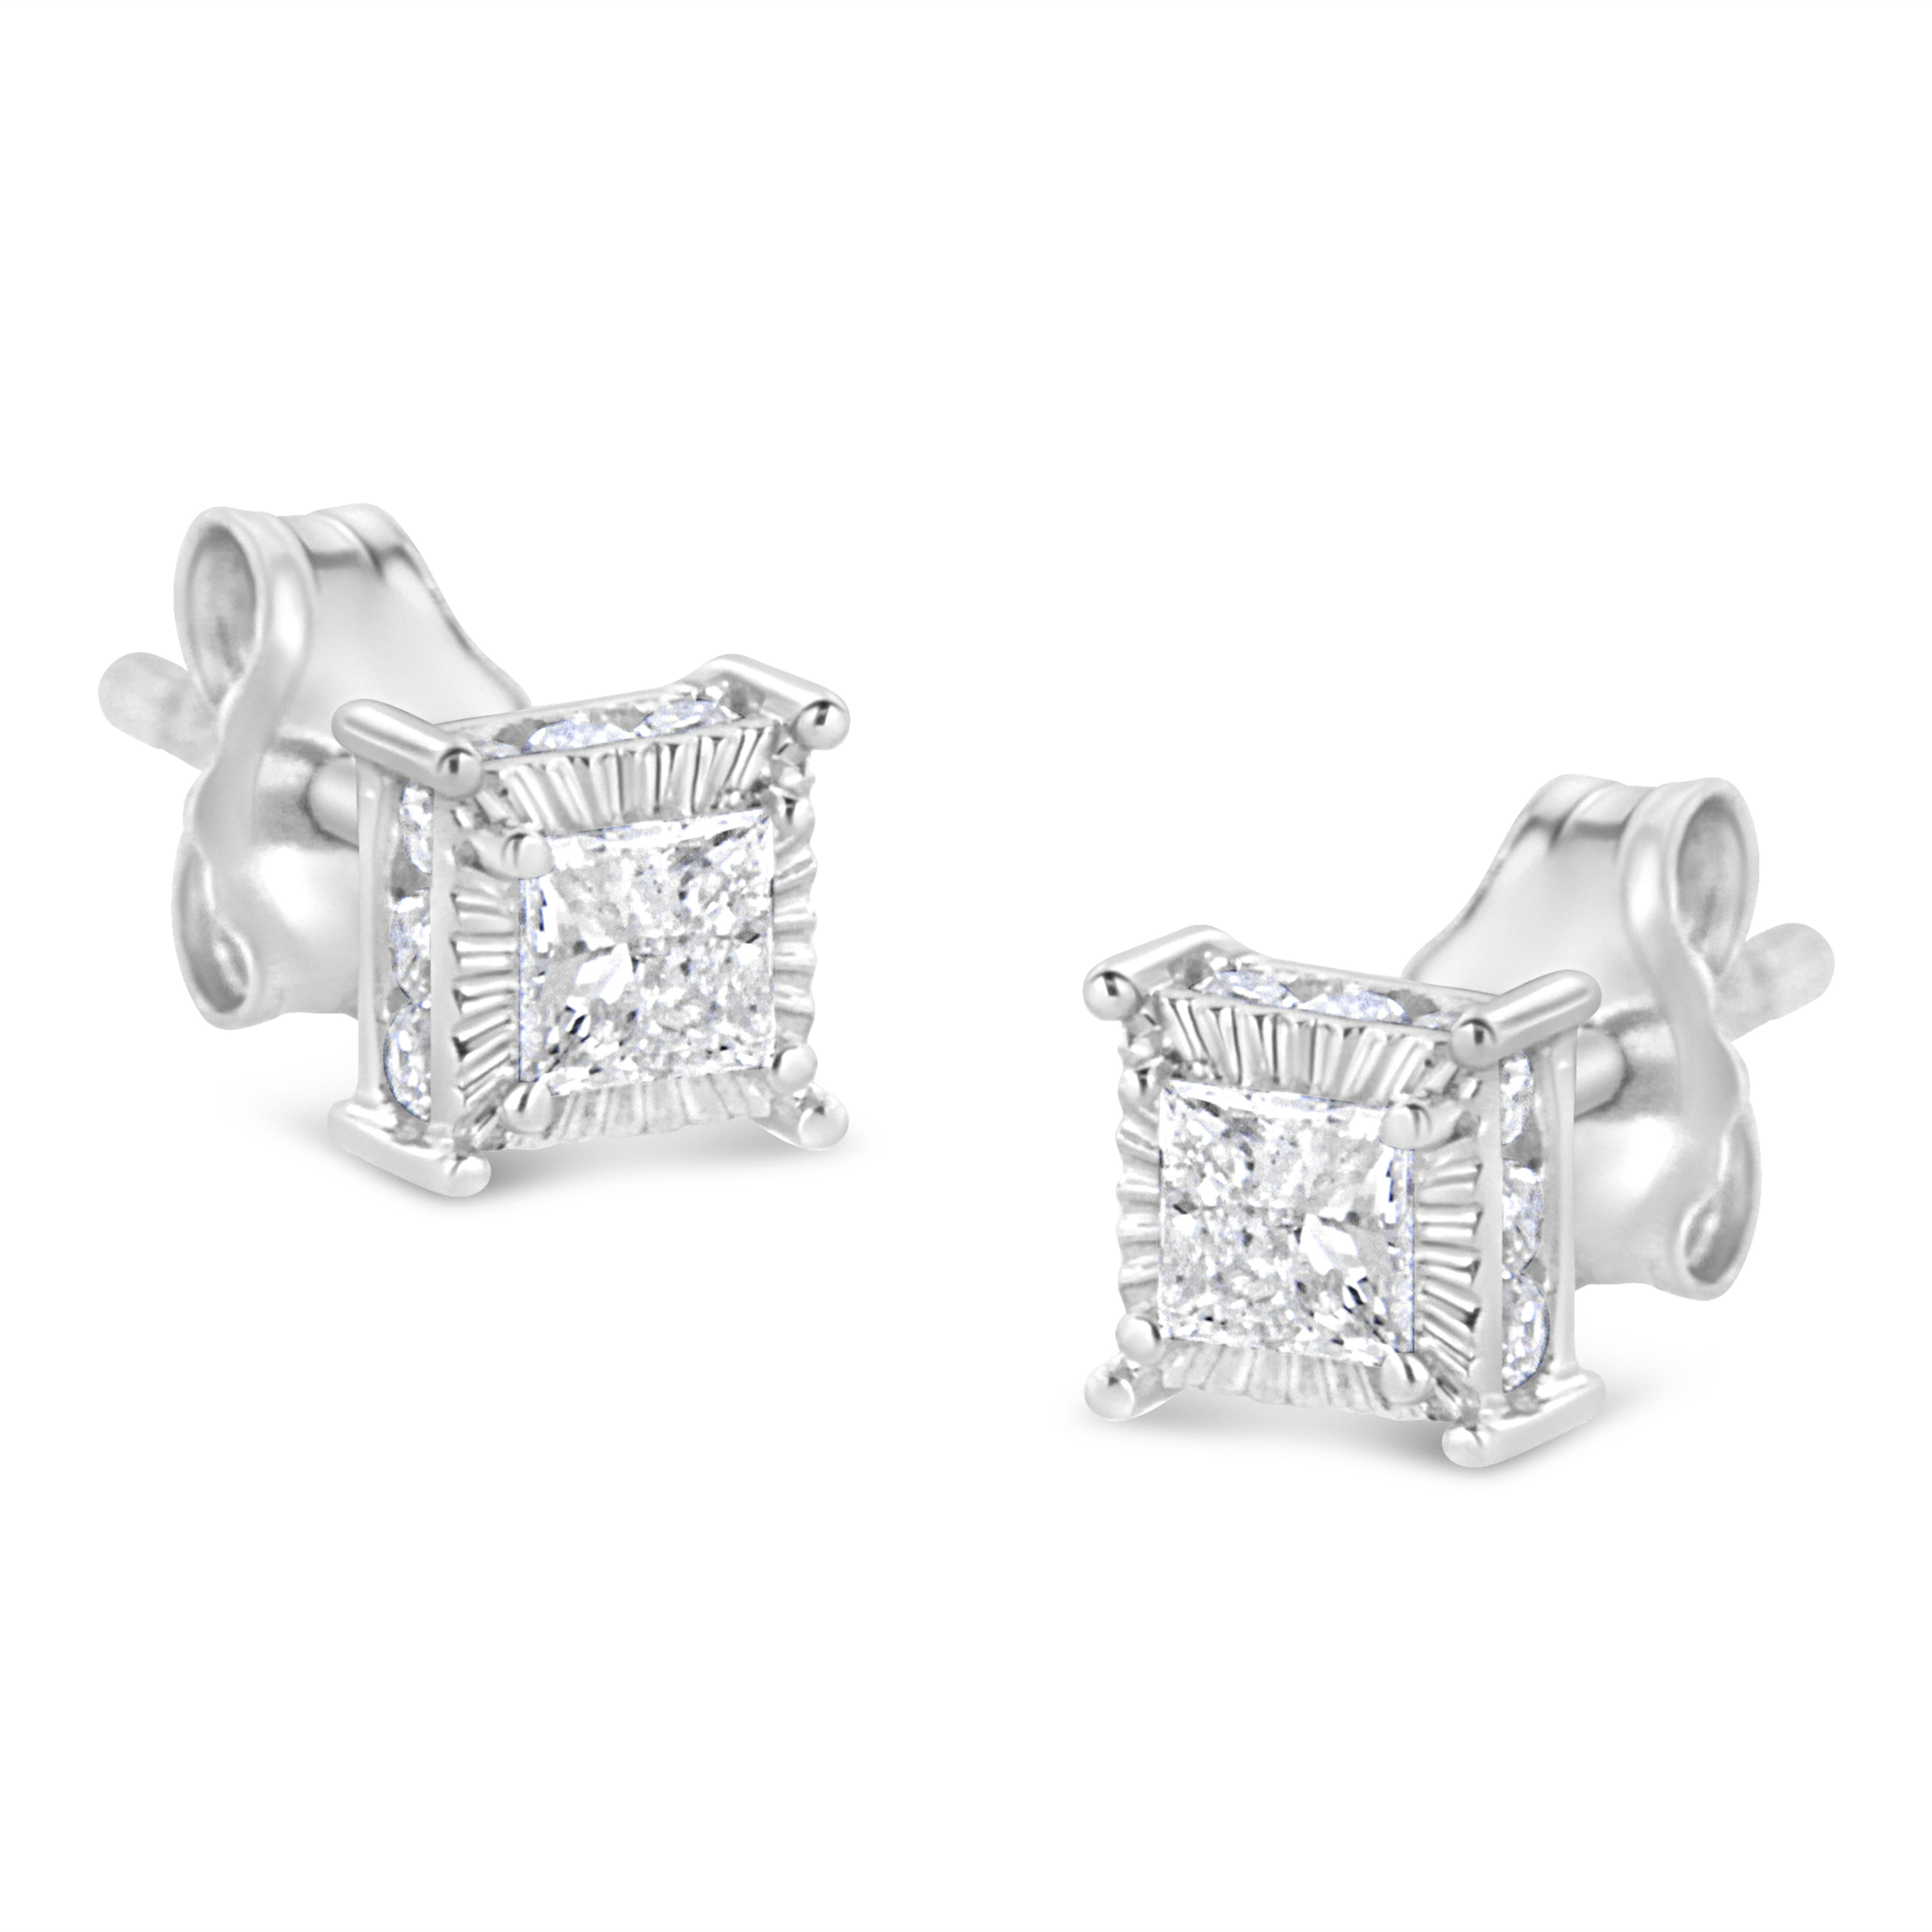 Dazzle with these unique miracle set diamond studs. This authentic design is crafted of real 92.5% sterling silver that has been electro-coated with genuine rhodium (a platinum-family metal), a precious metal that will keep a tarnish-free shine for